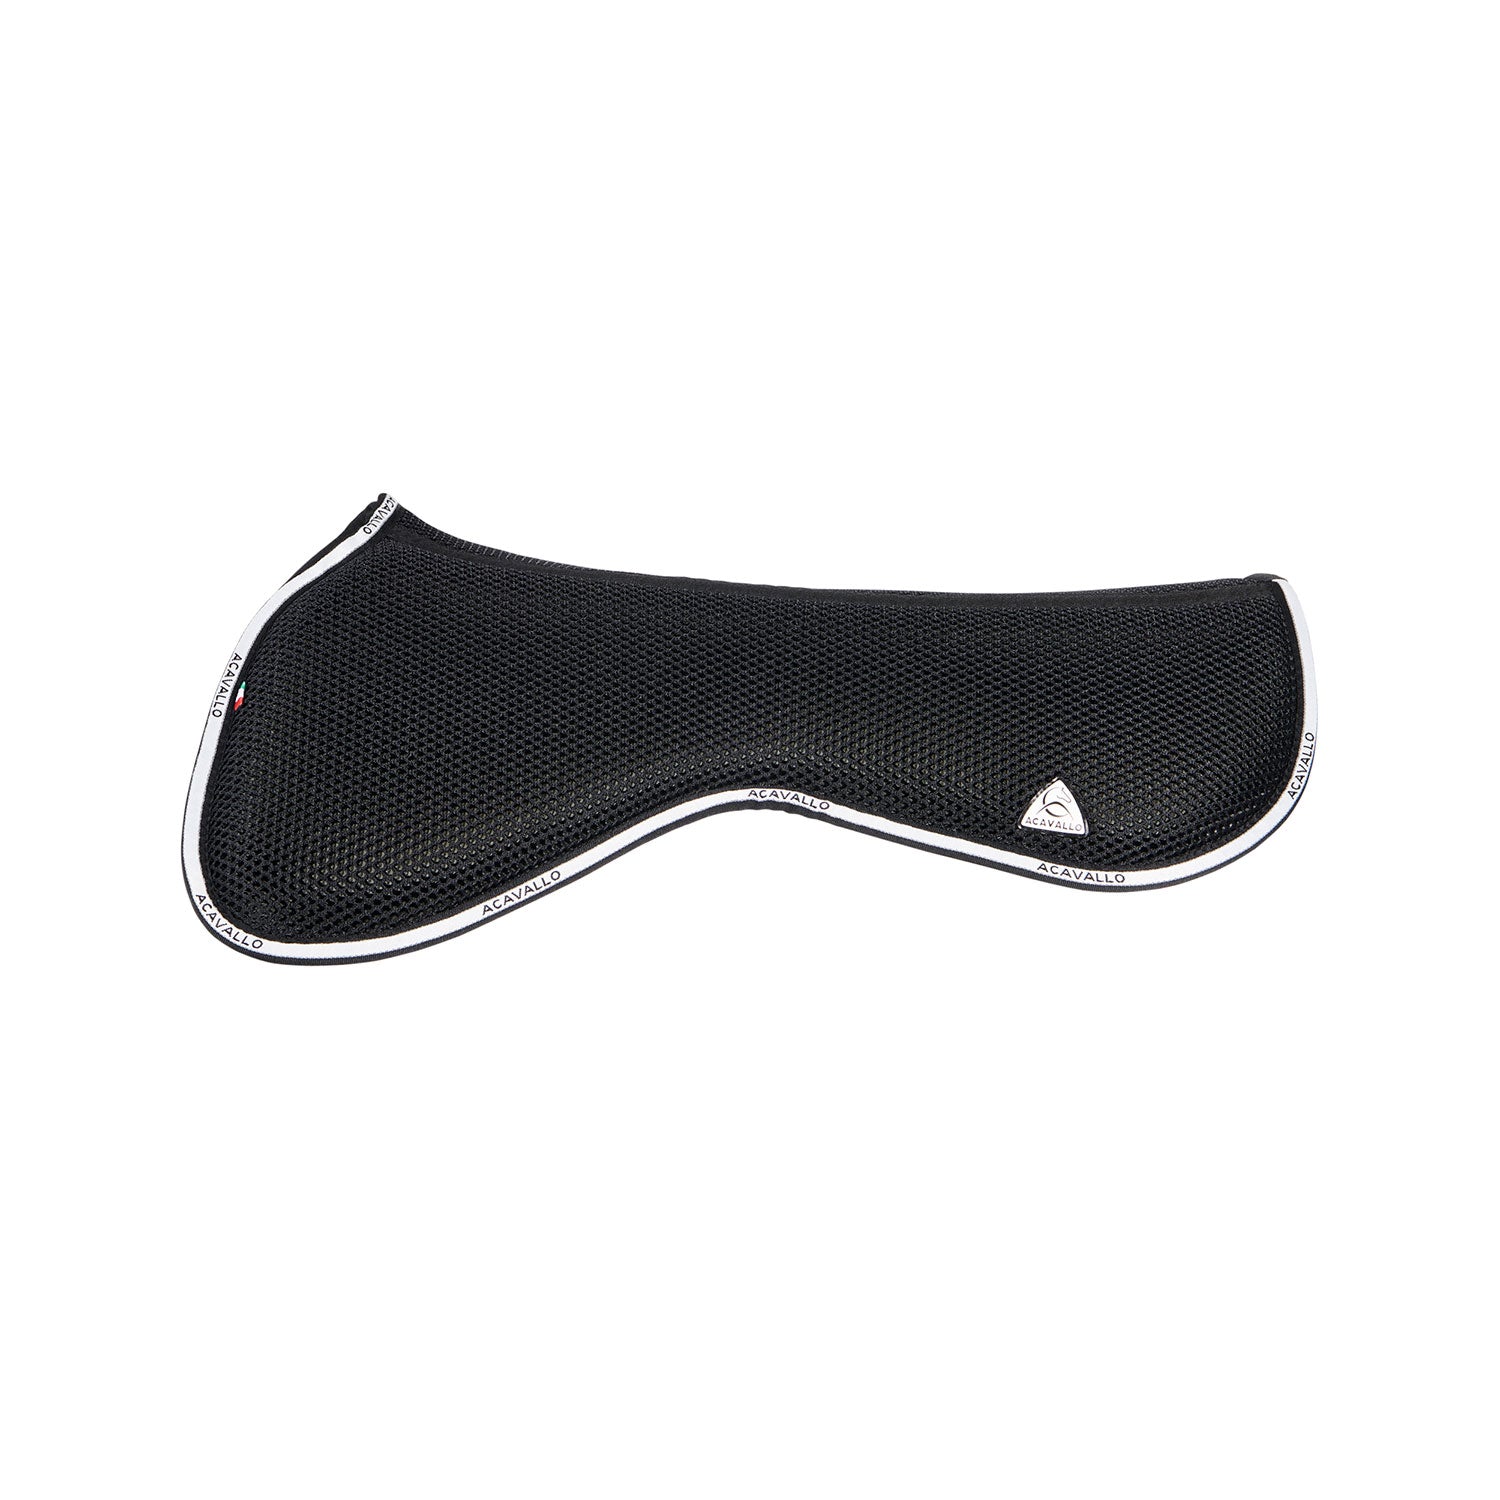 Pad Withers shaped spine free jumping pad 3D spacer microfleece - Reitstiefel Kandel - Dein Reitshop